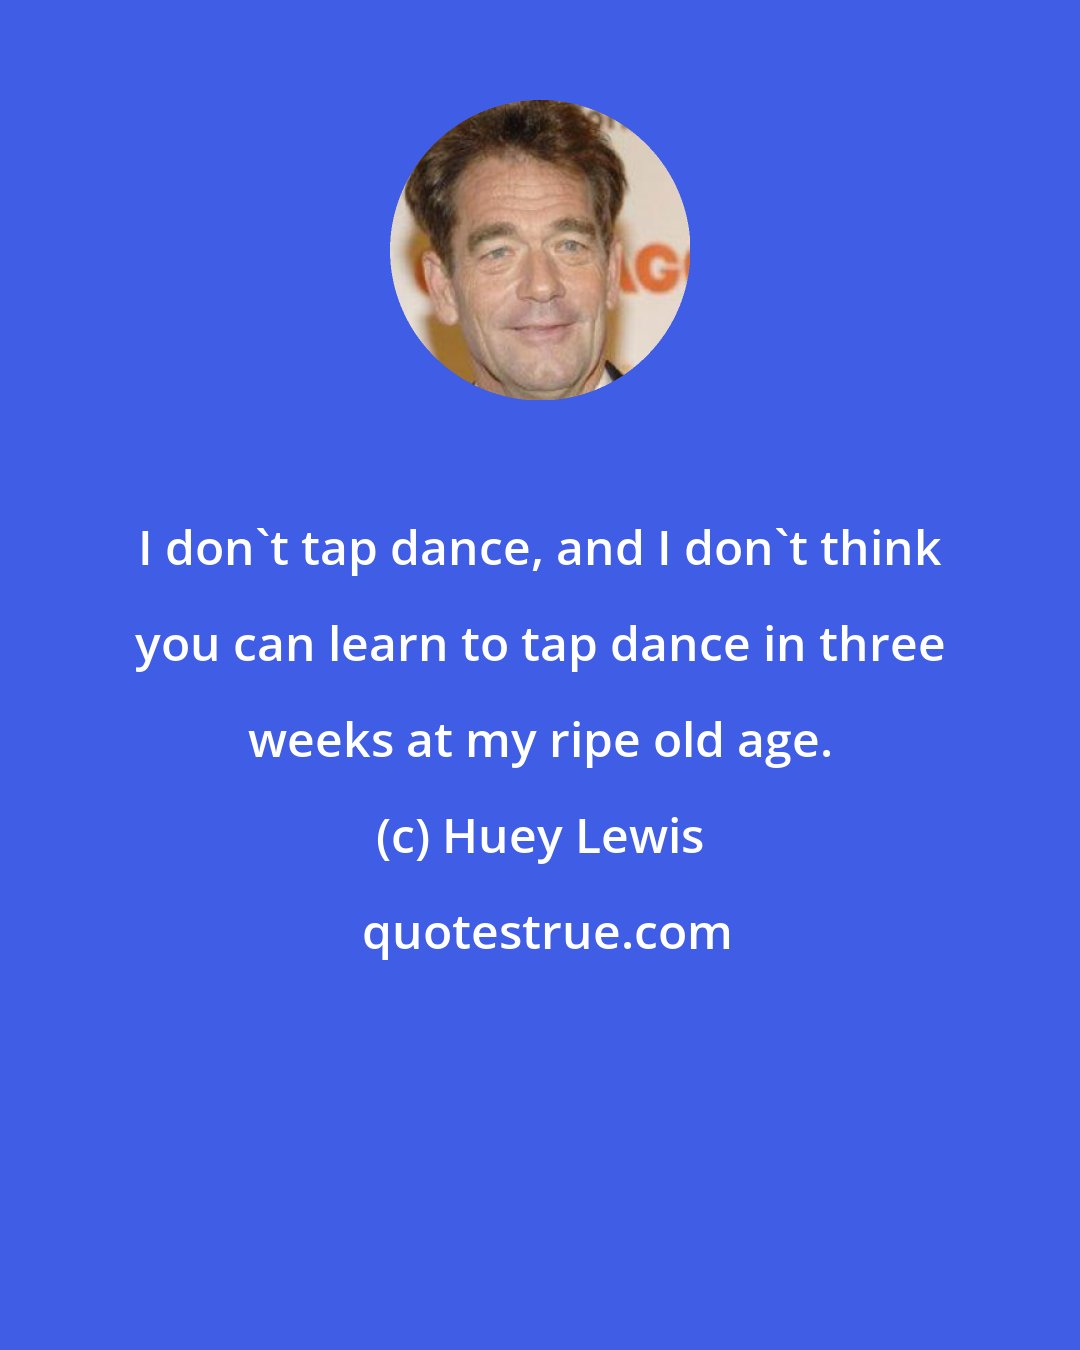 Huey Lewis: I don't tap dance, and I don't think you can learn to tap dance in three weeks at my ripe old age.